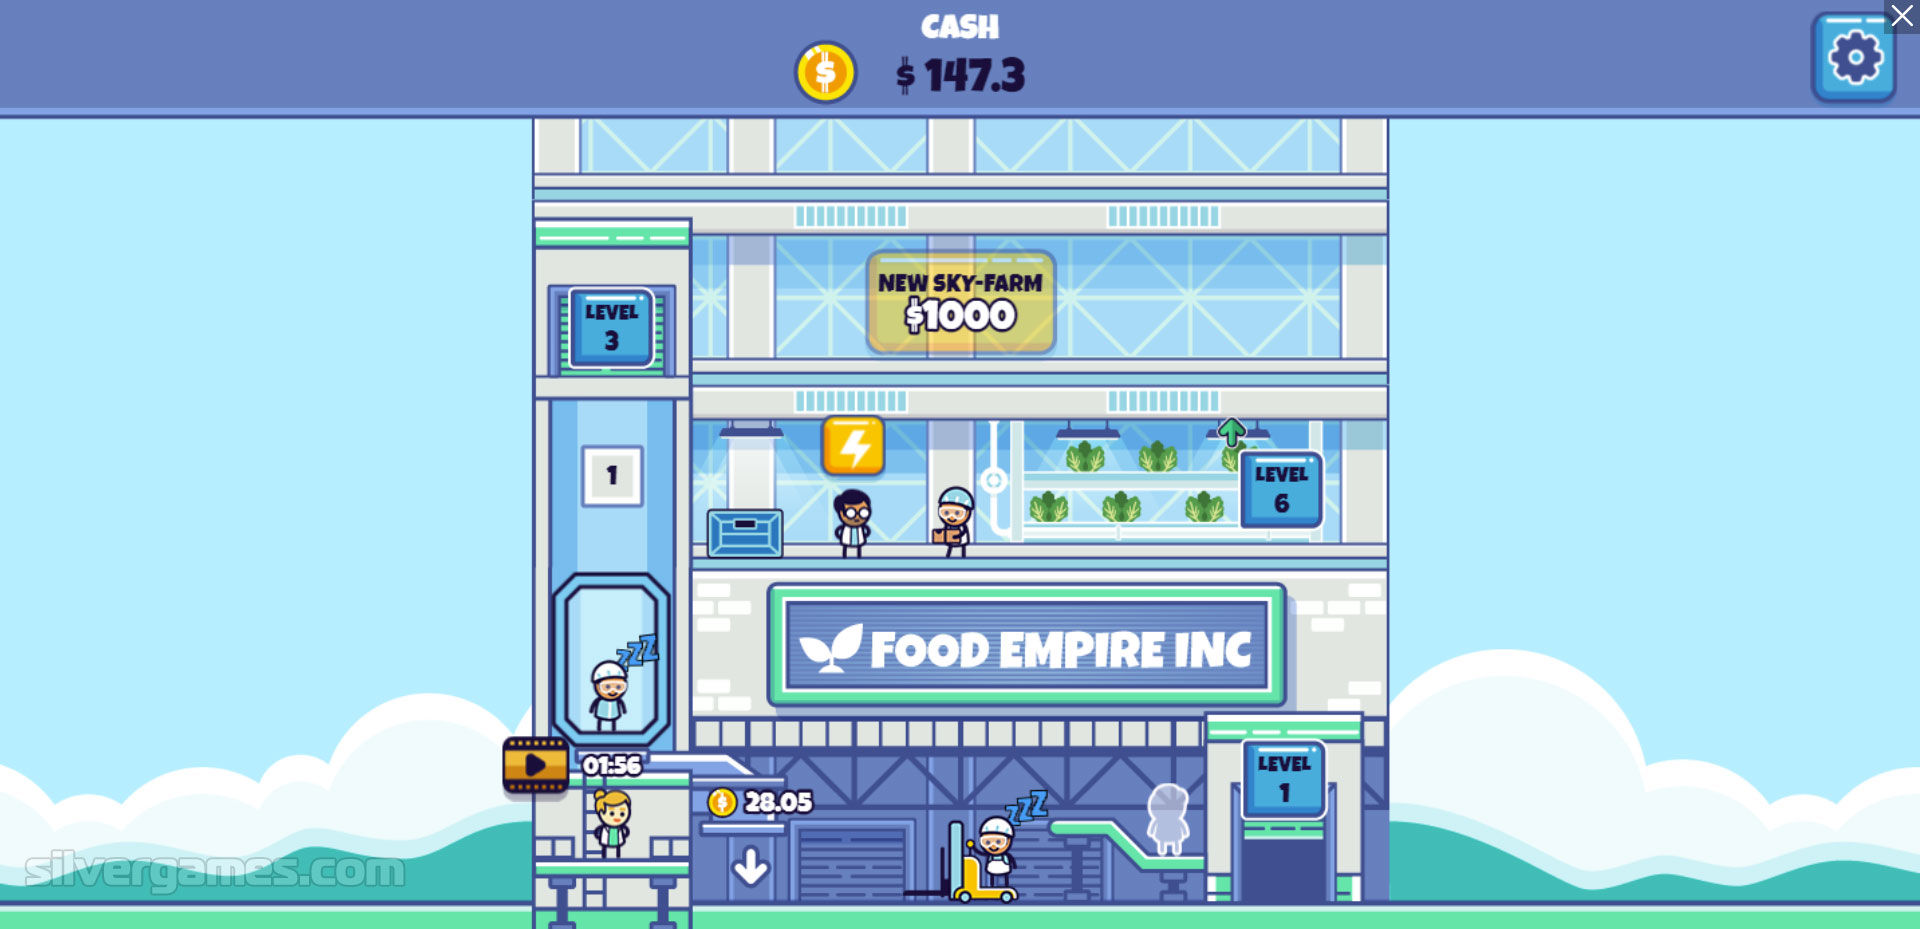 Idle Mining Empire - Play Online on SilverGames 🕹